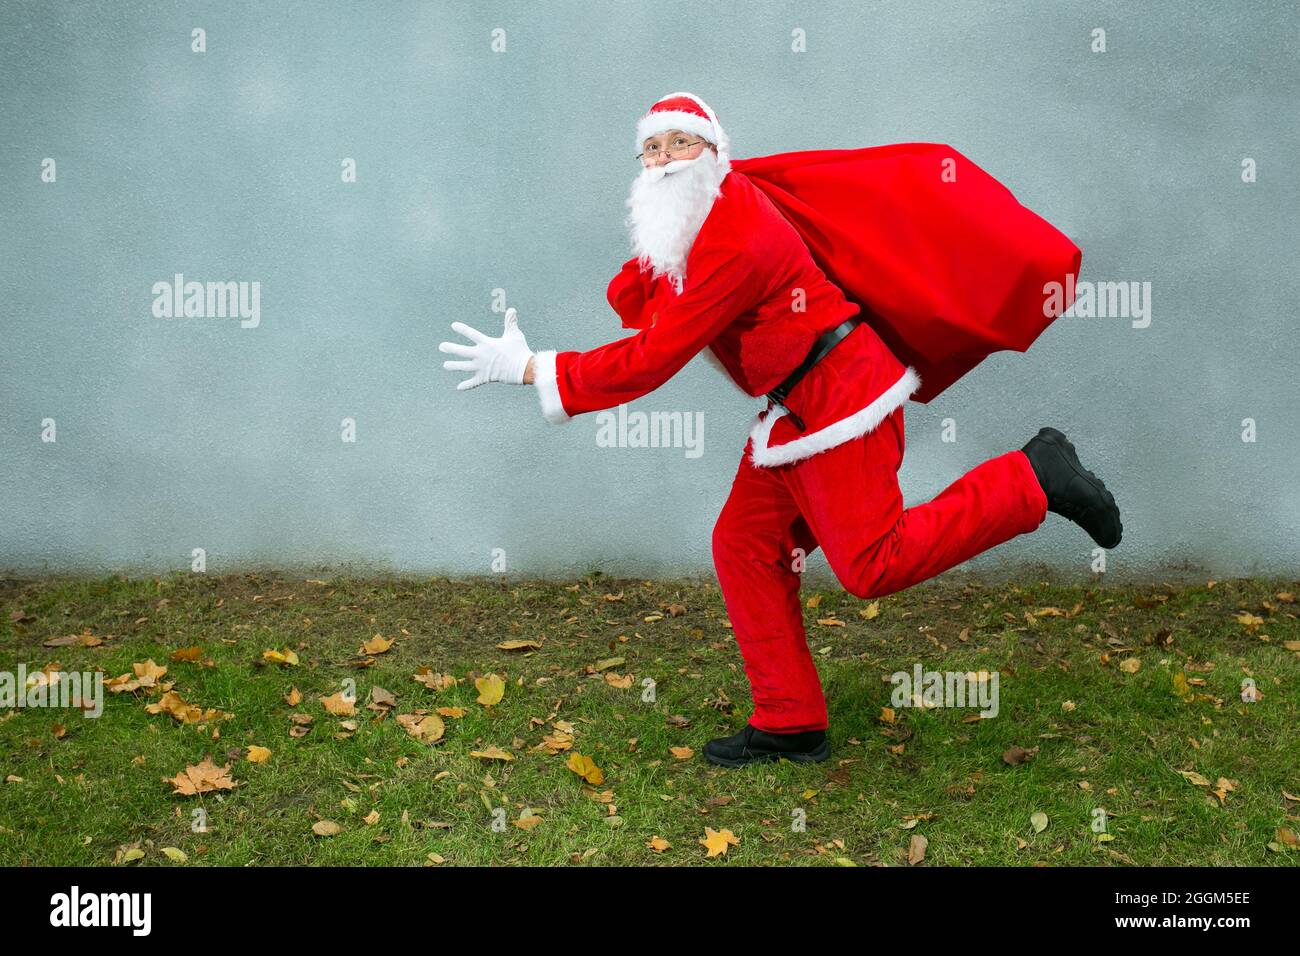 Santa Claus runs with a big red bag with gifts. Close-up on a gray background and green grass. Stock Photo